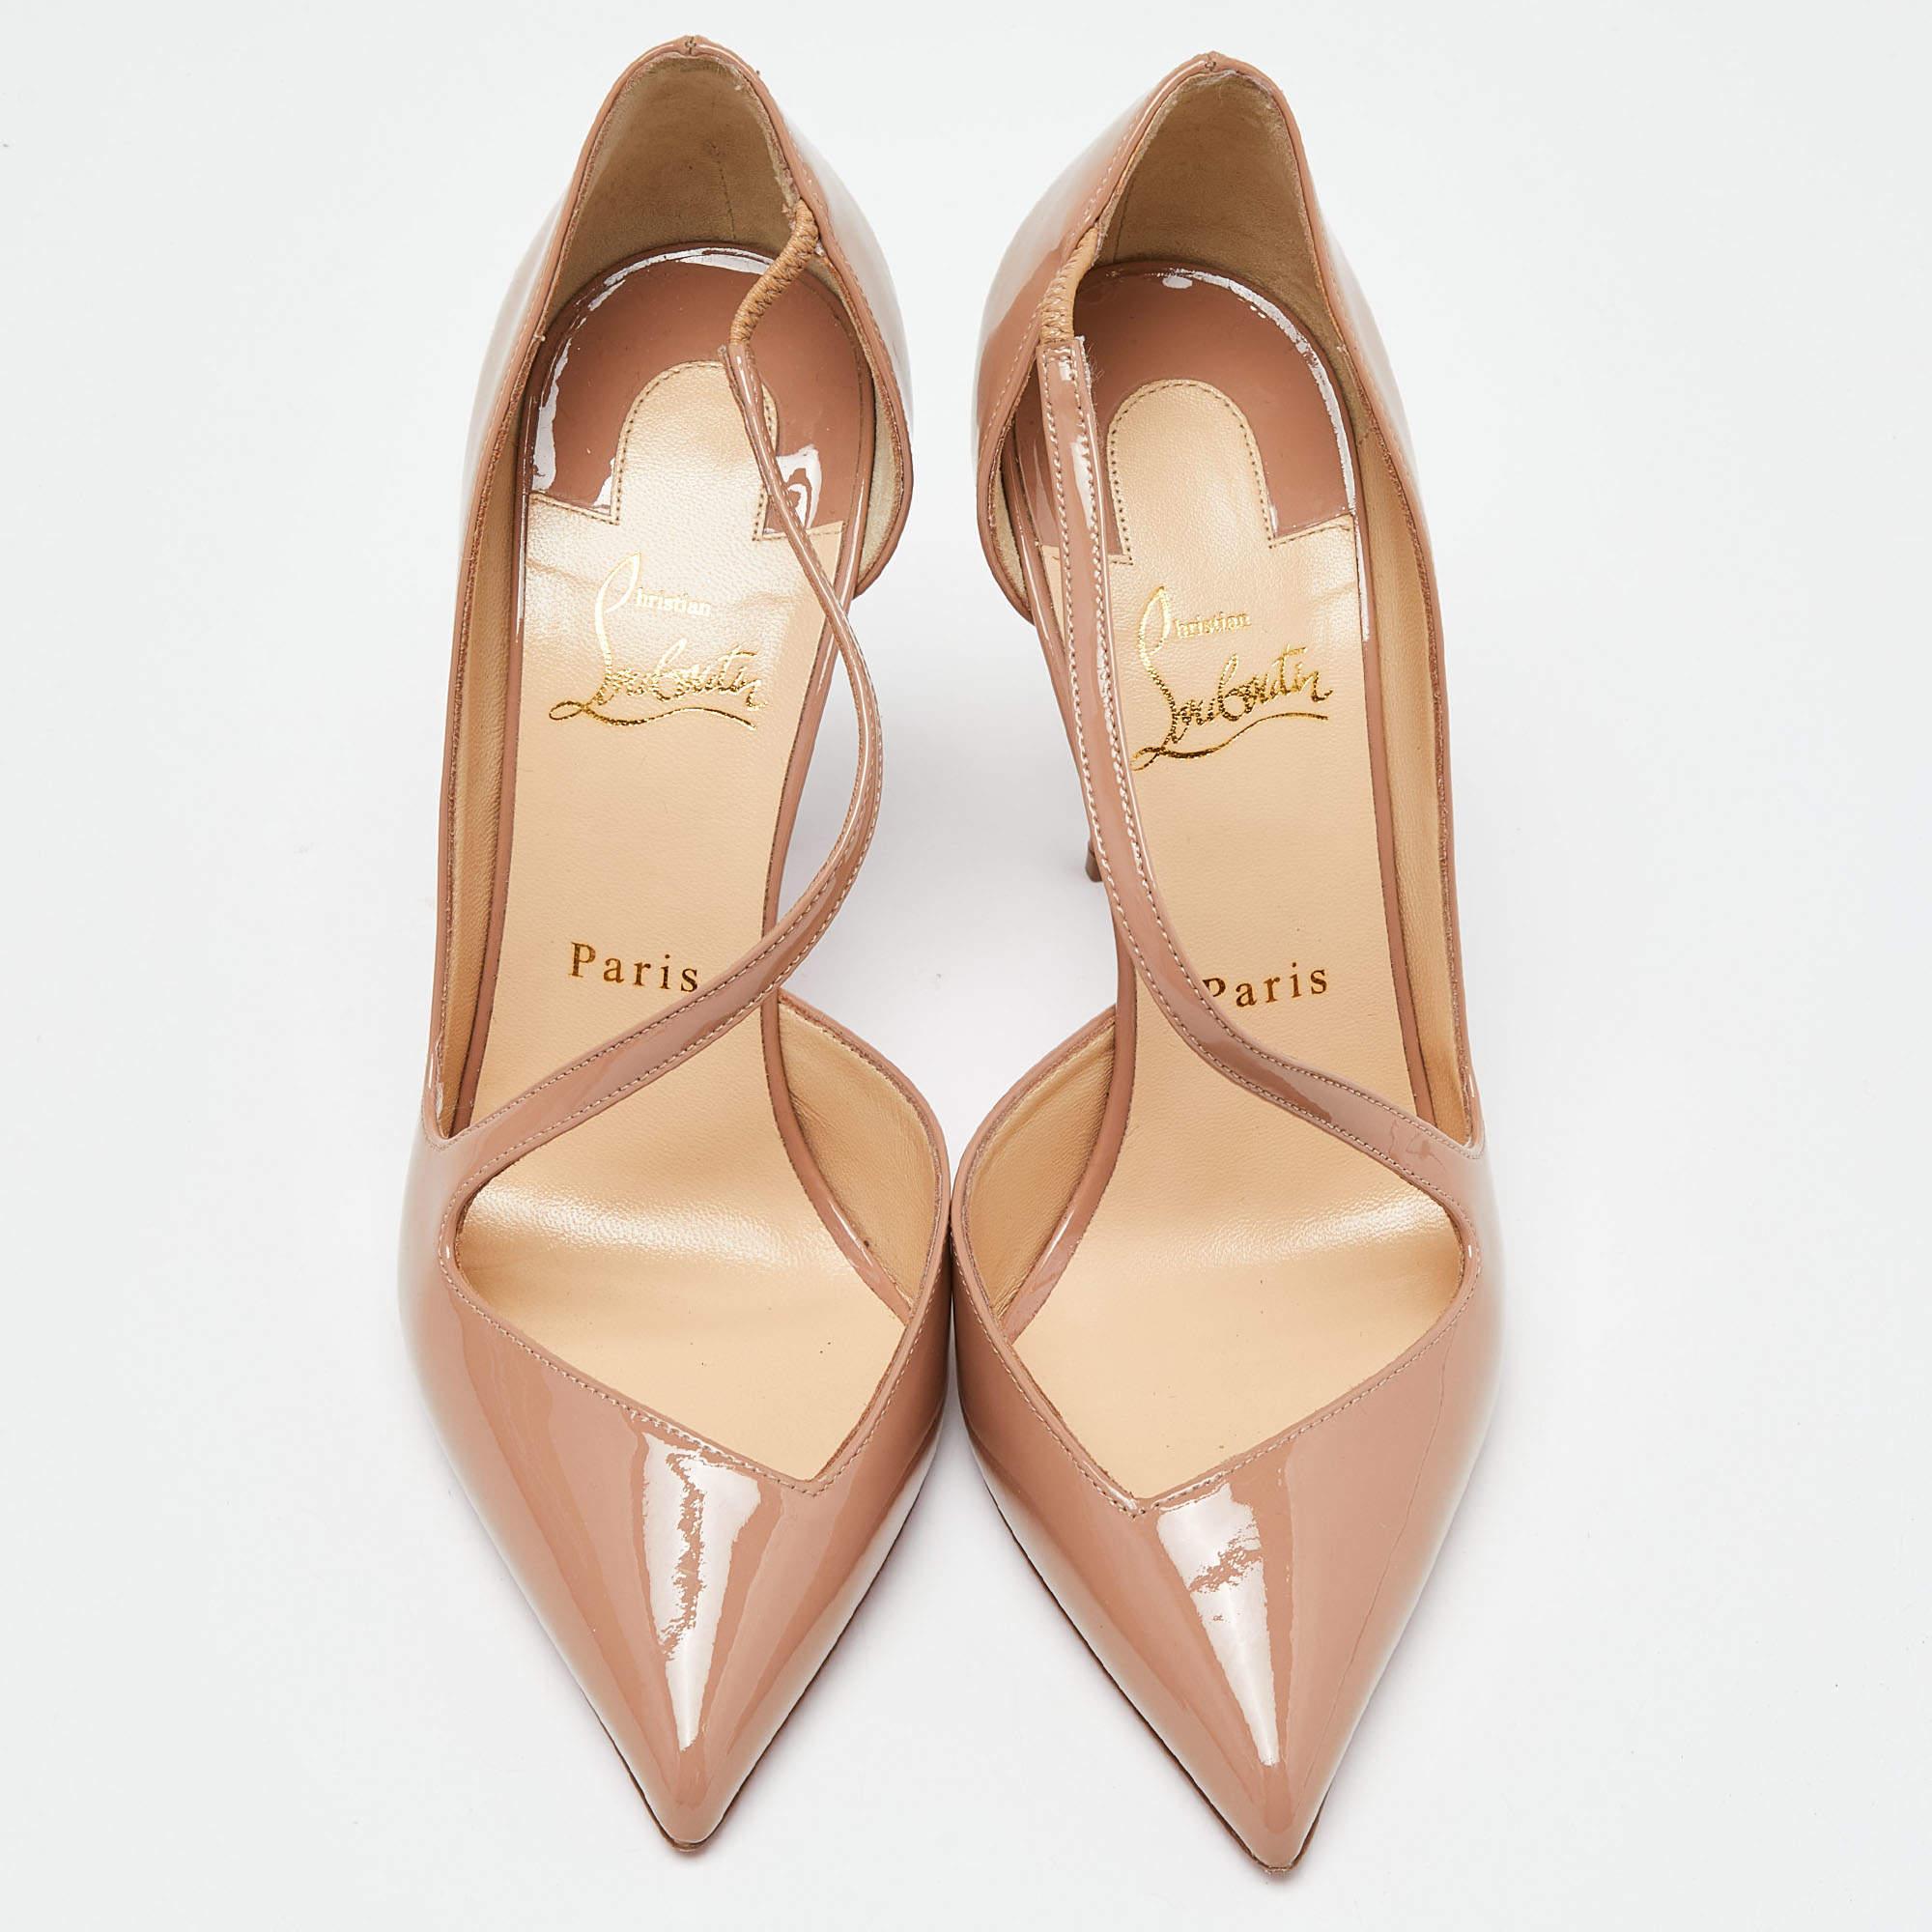 These pumps from Christian Louboutin are meant to be a loved choice. Wonderfully crafted and balanced on sleek heels, the pumps will lift your feet in a stunning silhouette.

Includes
Original Dustbag, Original Box, Extra Heel Tips